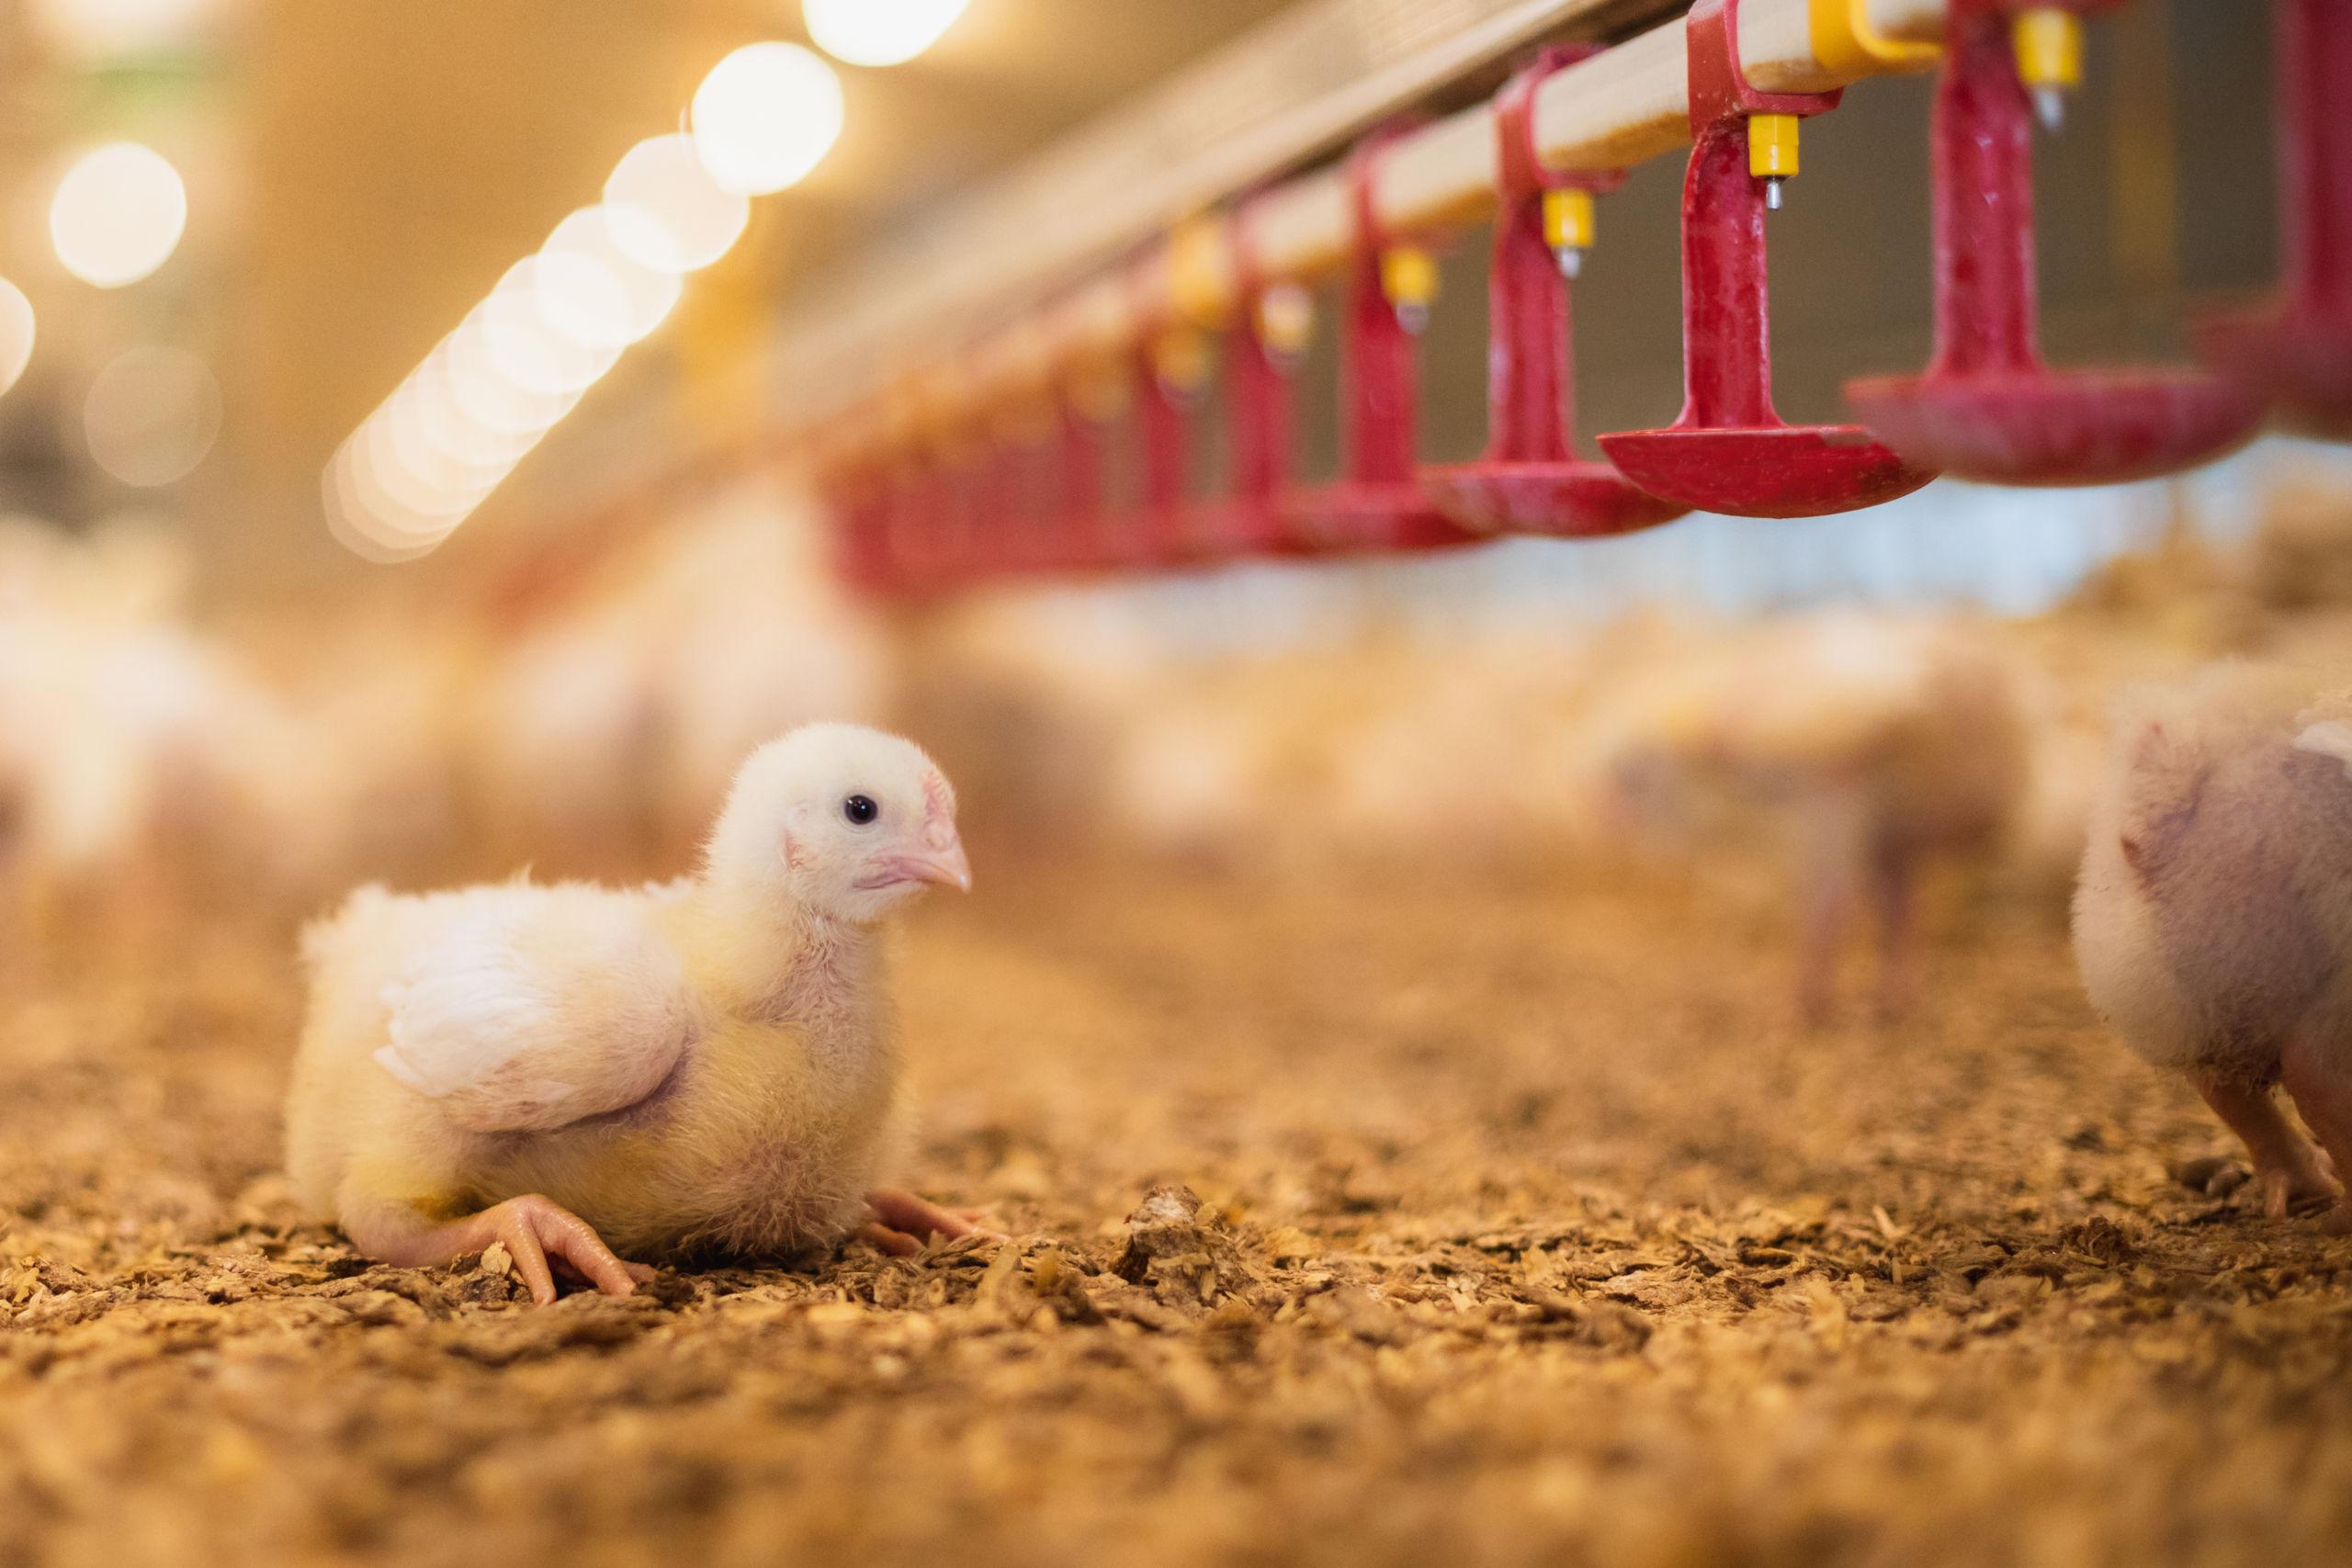 Poultry Standards | Red Tractor